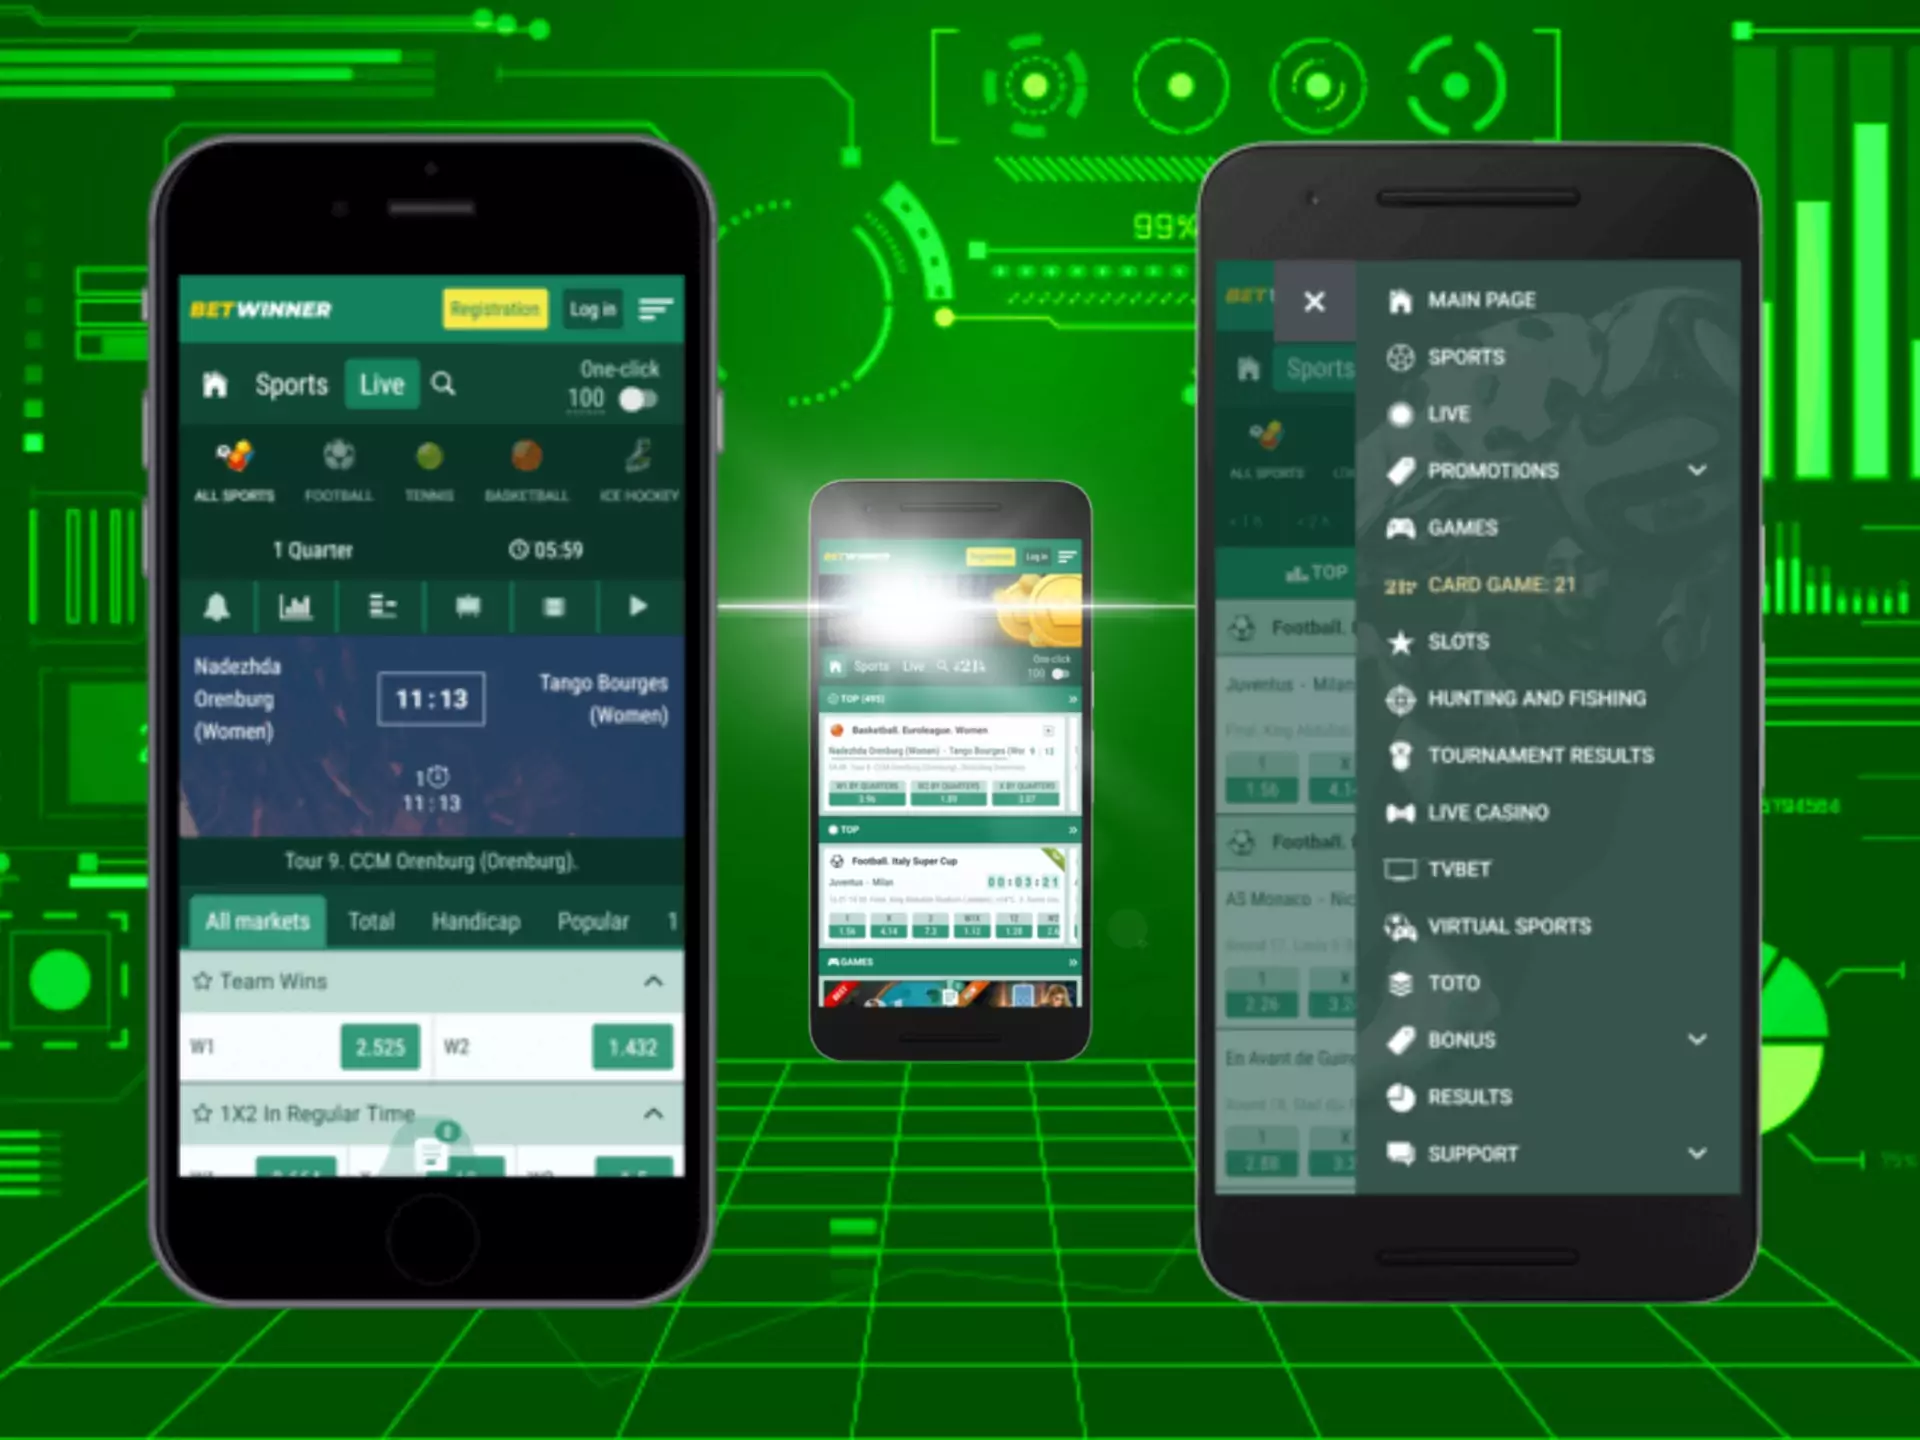 Betwinner mobile version has almost all the same features as a desktop version does.